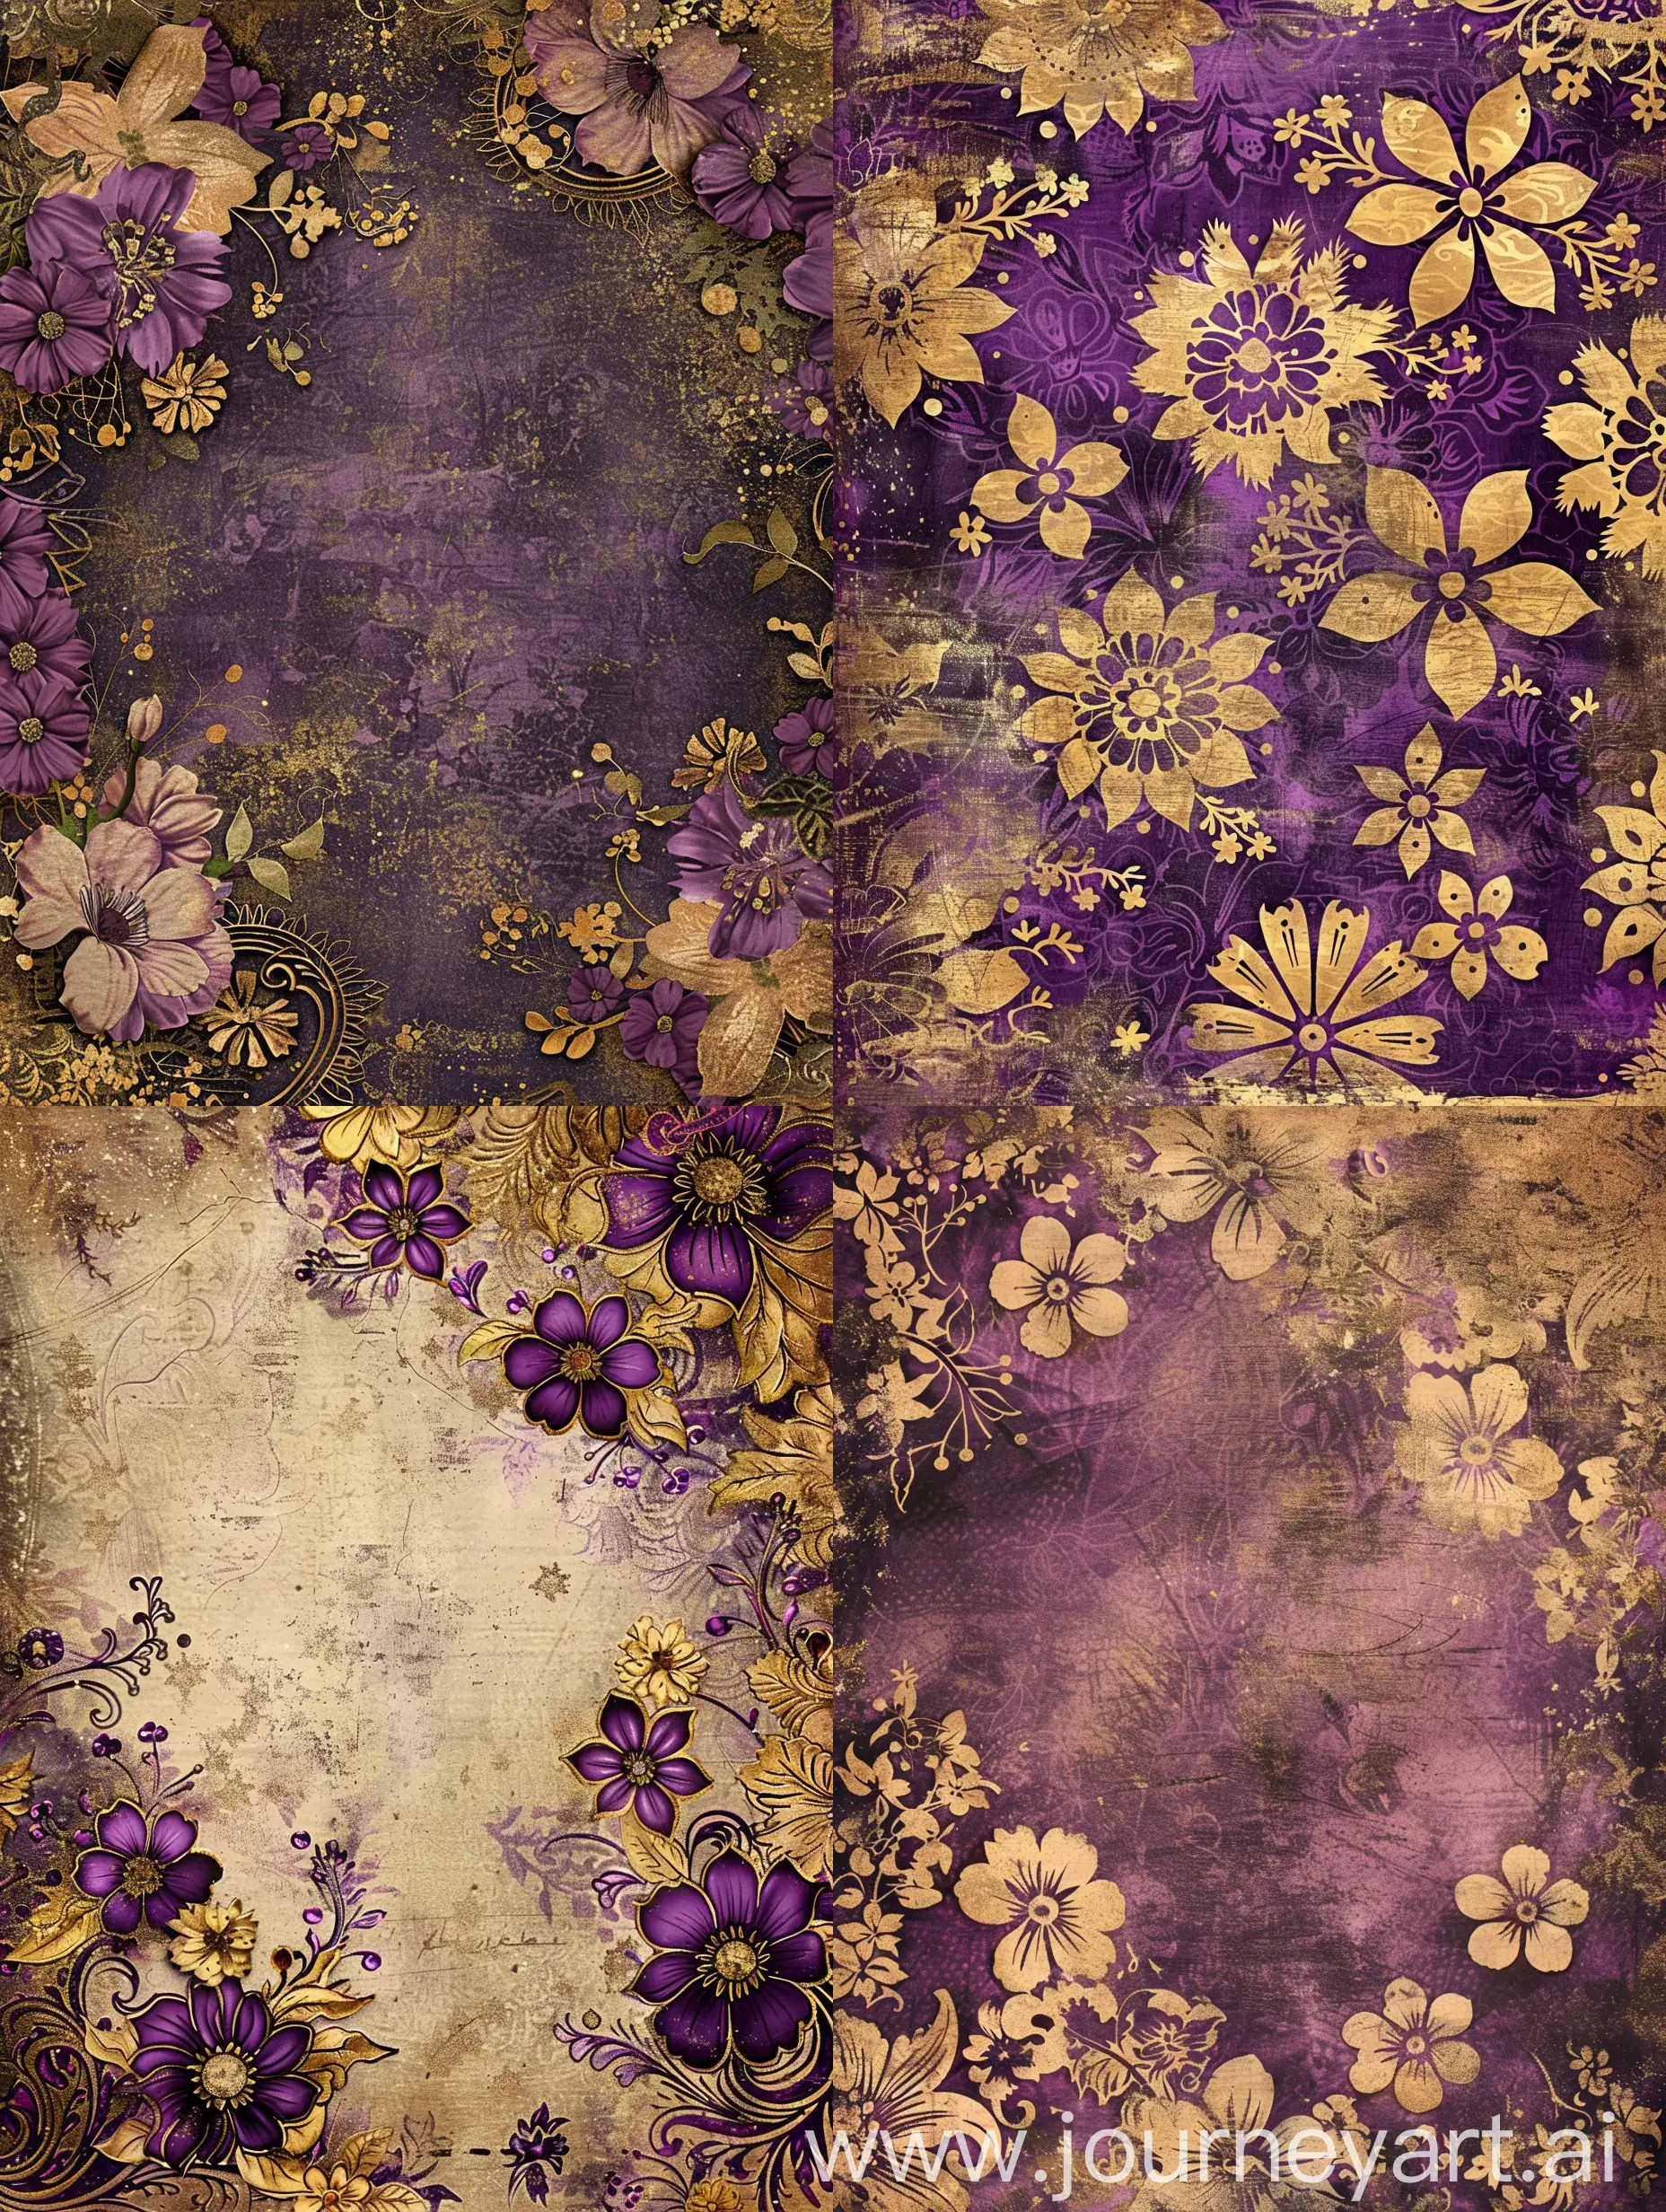 Floral, background, printable, beautiful, fantasy, purple and gold, Journal, Digital paper, Junk Journal, Scrapbook Paper in Floral Vintage Style